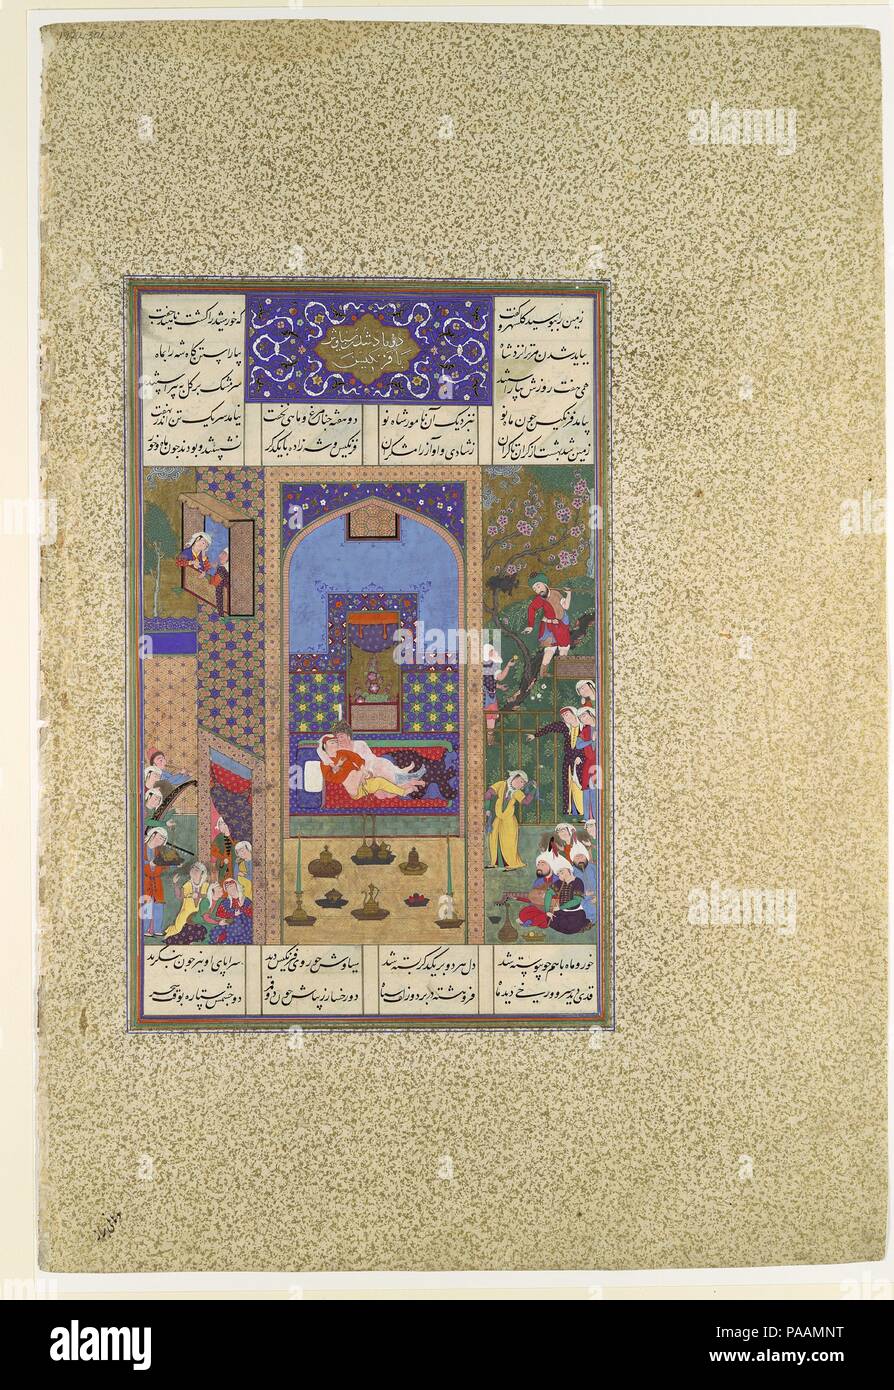 'The Wedding of Siyavush and Farangis', Folio 185v from the Shahnama (Book of Kings) of Shah Tahmasp. Artist: Painting attributed to Qasim ibn 'Ali (active ca. 1525-60). Author: Abu'l Qasim Firdausi (935-1020). Dimensions: Painting: H. 11 3/8 in. (28.9 cm)   W. 7 1/4 in. (18.4 cm)  Page: H. 18 5/8 in. (47.3 cm)  W. 12 5/8 in. (32.1 cm)  Mat: H. 22 in. (55.9 cm)  W. 16 in. (40.6 cm). Workshop director: Mir Musavvir (active 1525-60). Date: ca. 1525-30.  Circumstances of his father's making force Siyavush, son of the Iranian shah Kai Kavus, into exile in Turan, the neighboring power and chief ene Stock Photo